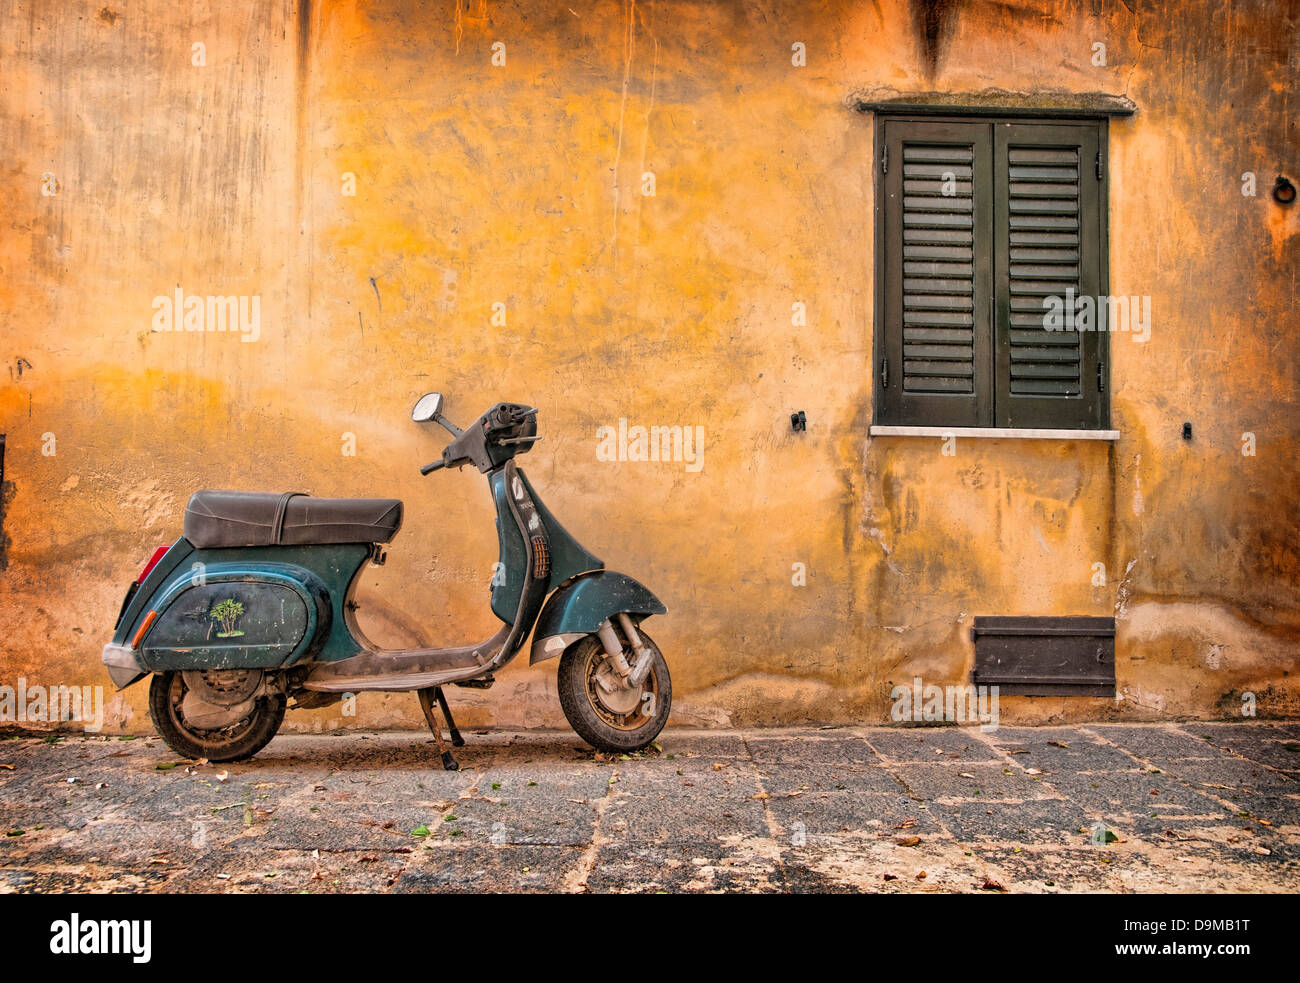 Green Vespa Scooter in front of weathered orange wall and green shutters in Castelbuono, Sicily Italy Stock Photo